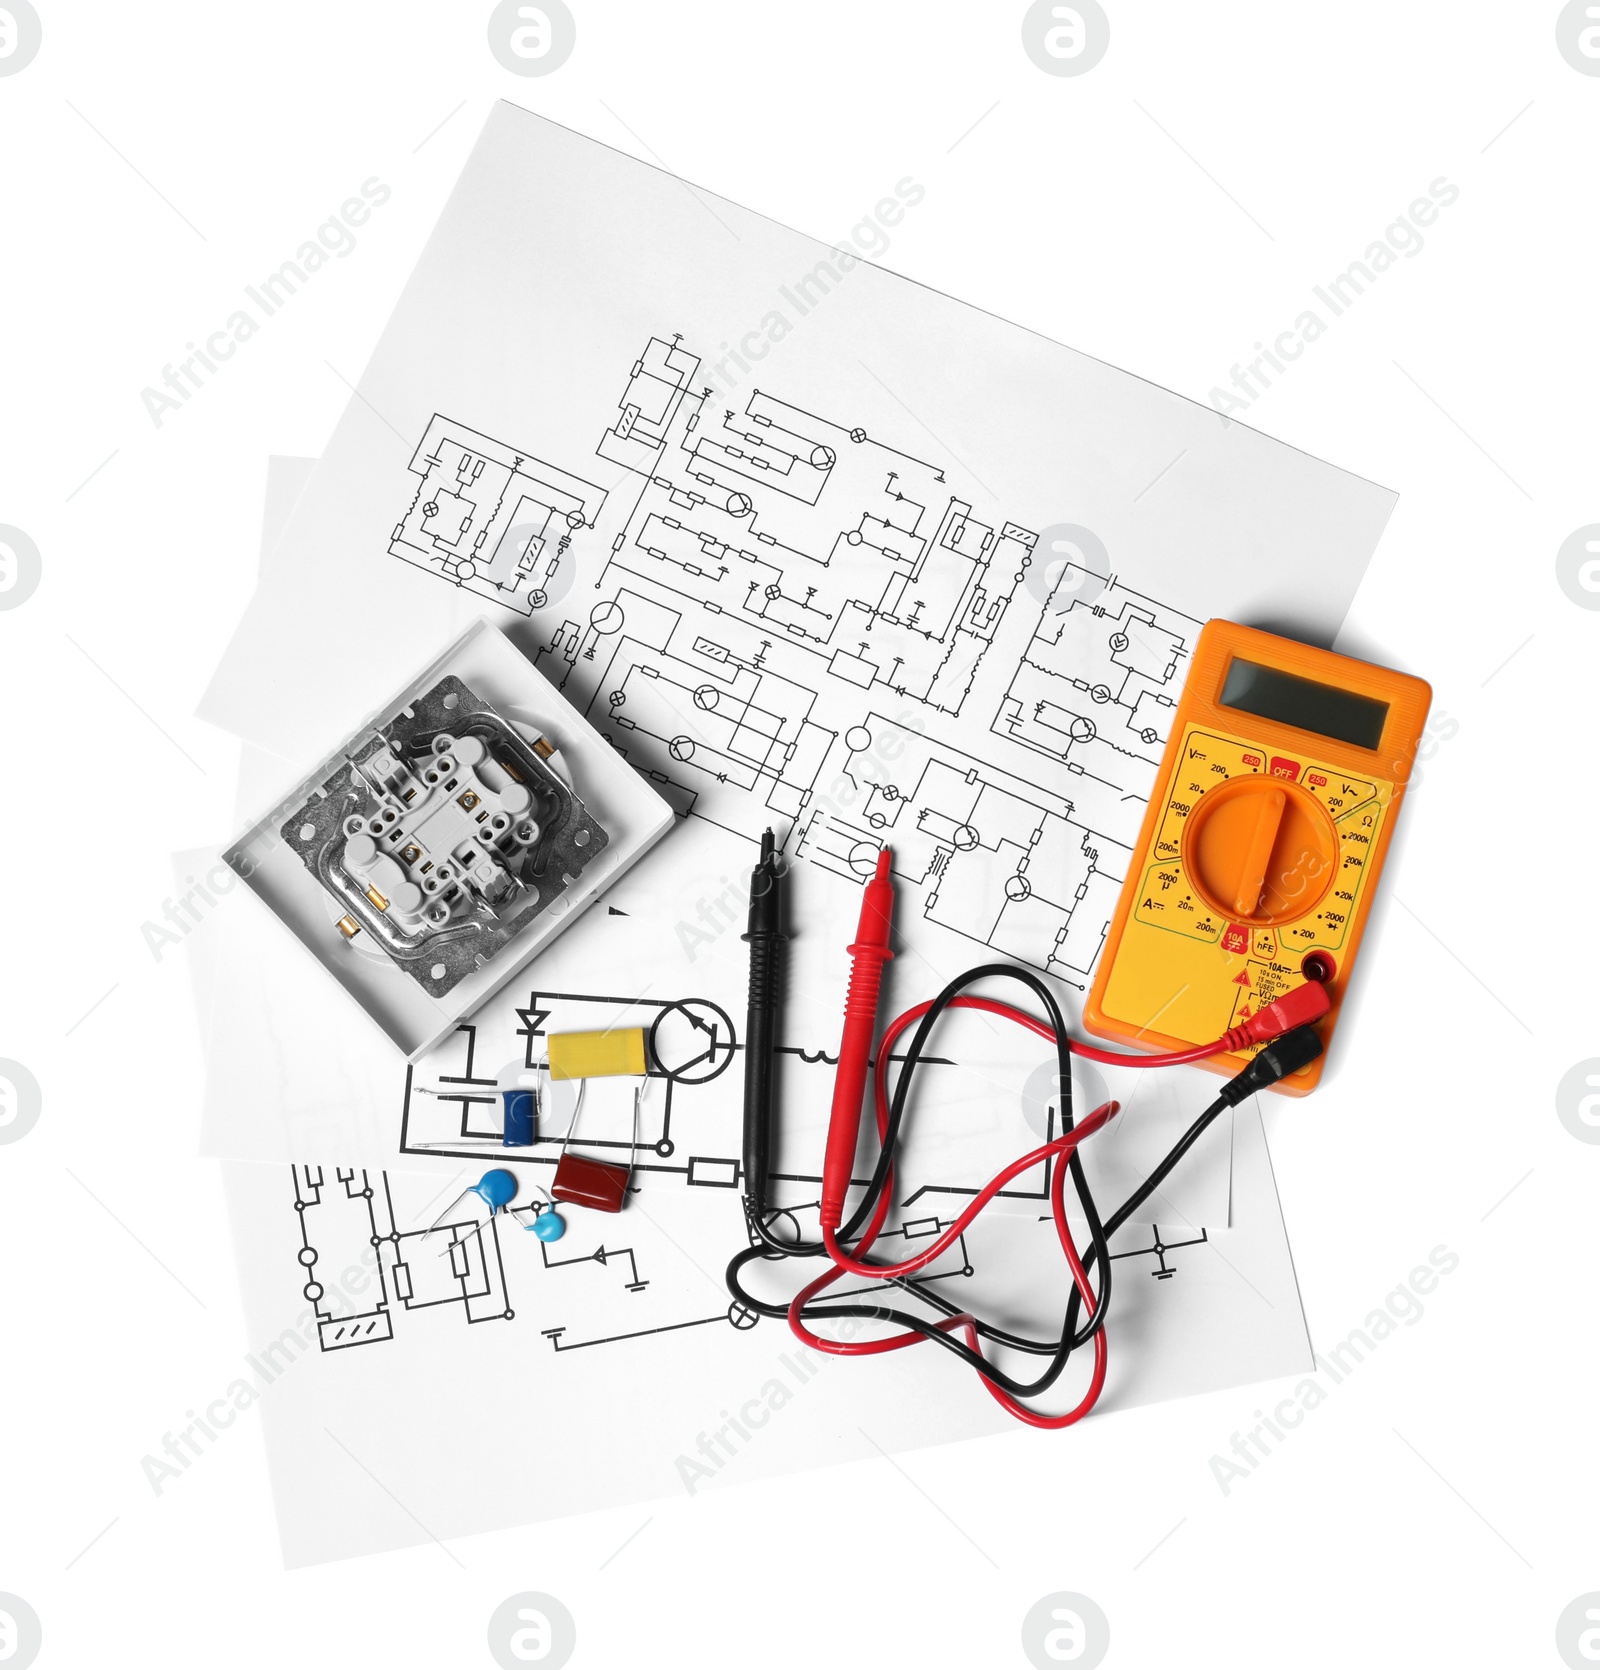 Photo of Wiring diagrams, digital multimeter and disassembled light switch isolated on white, top view